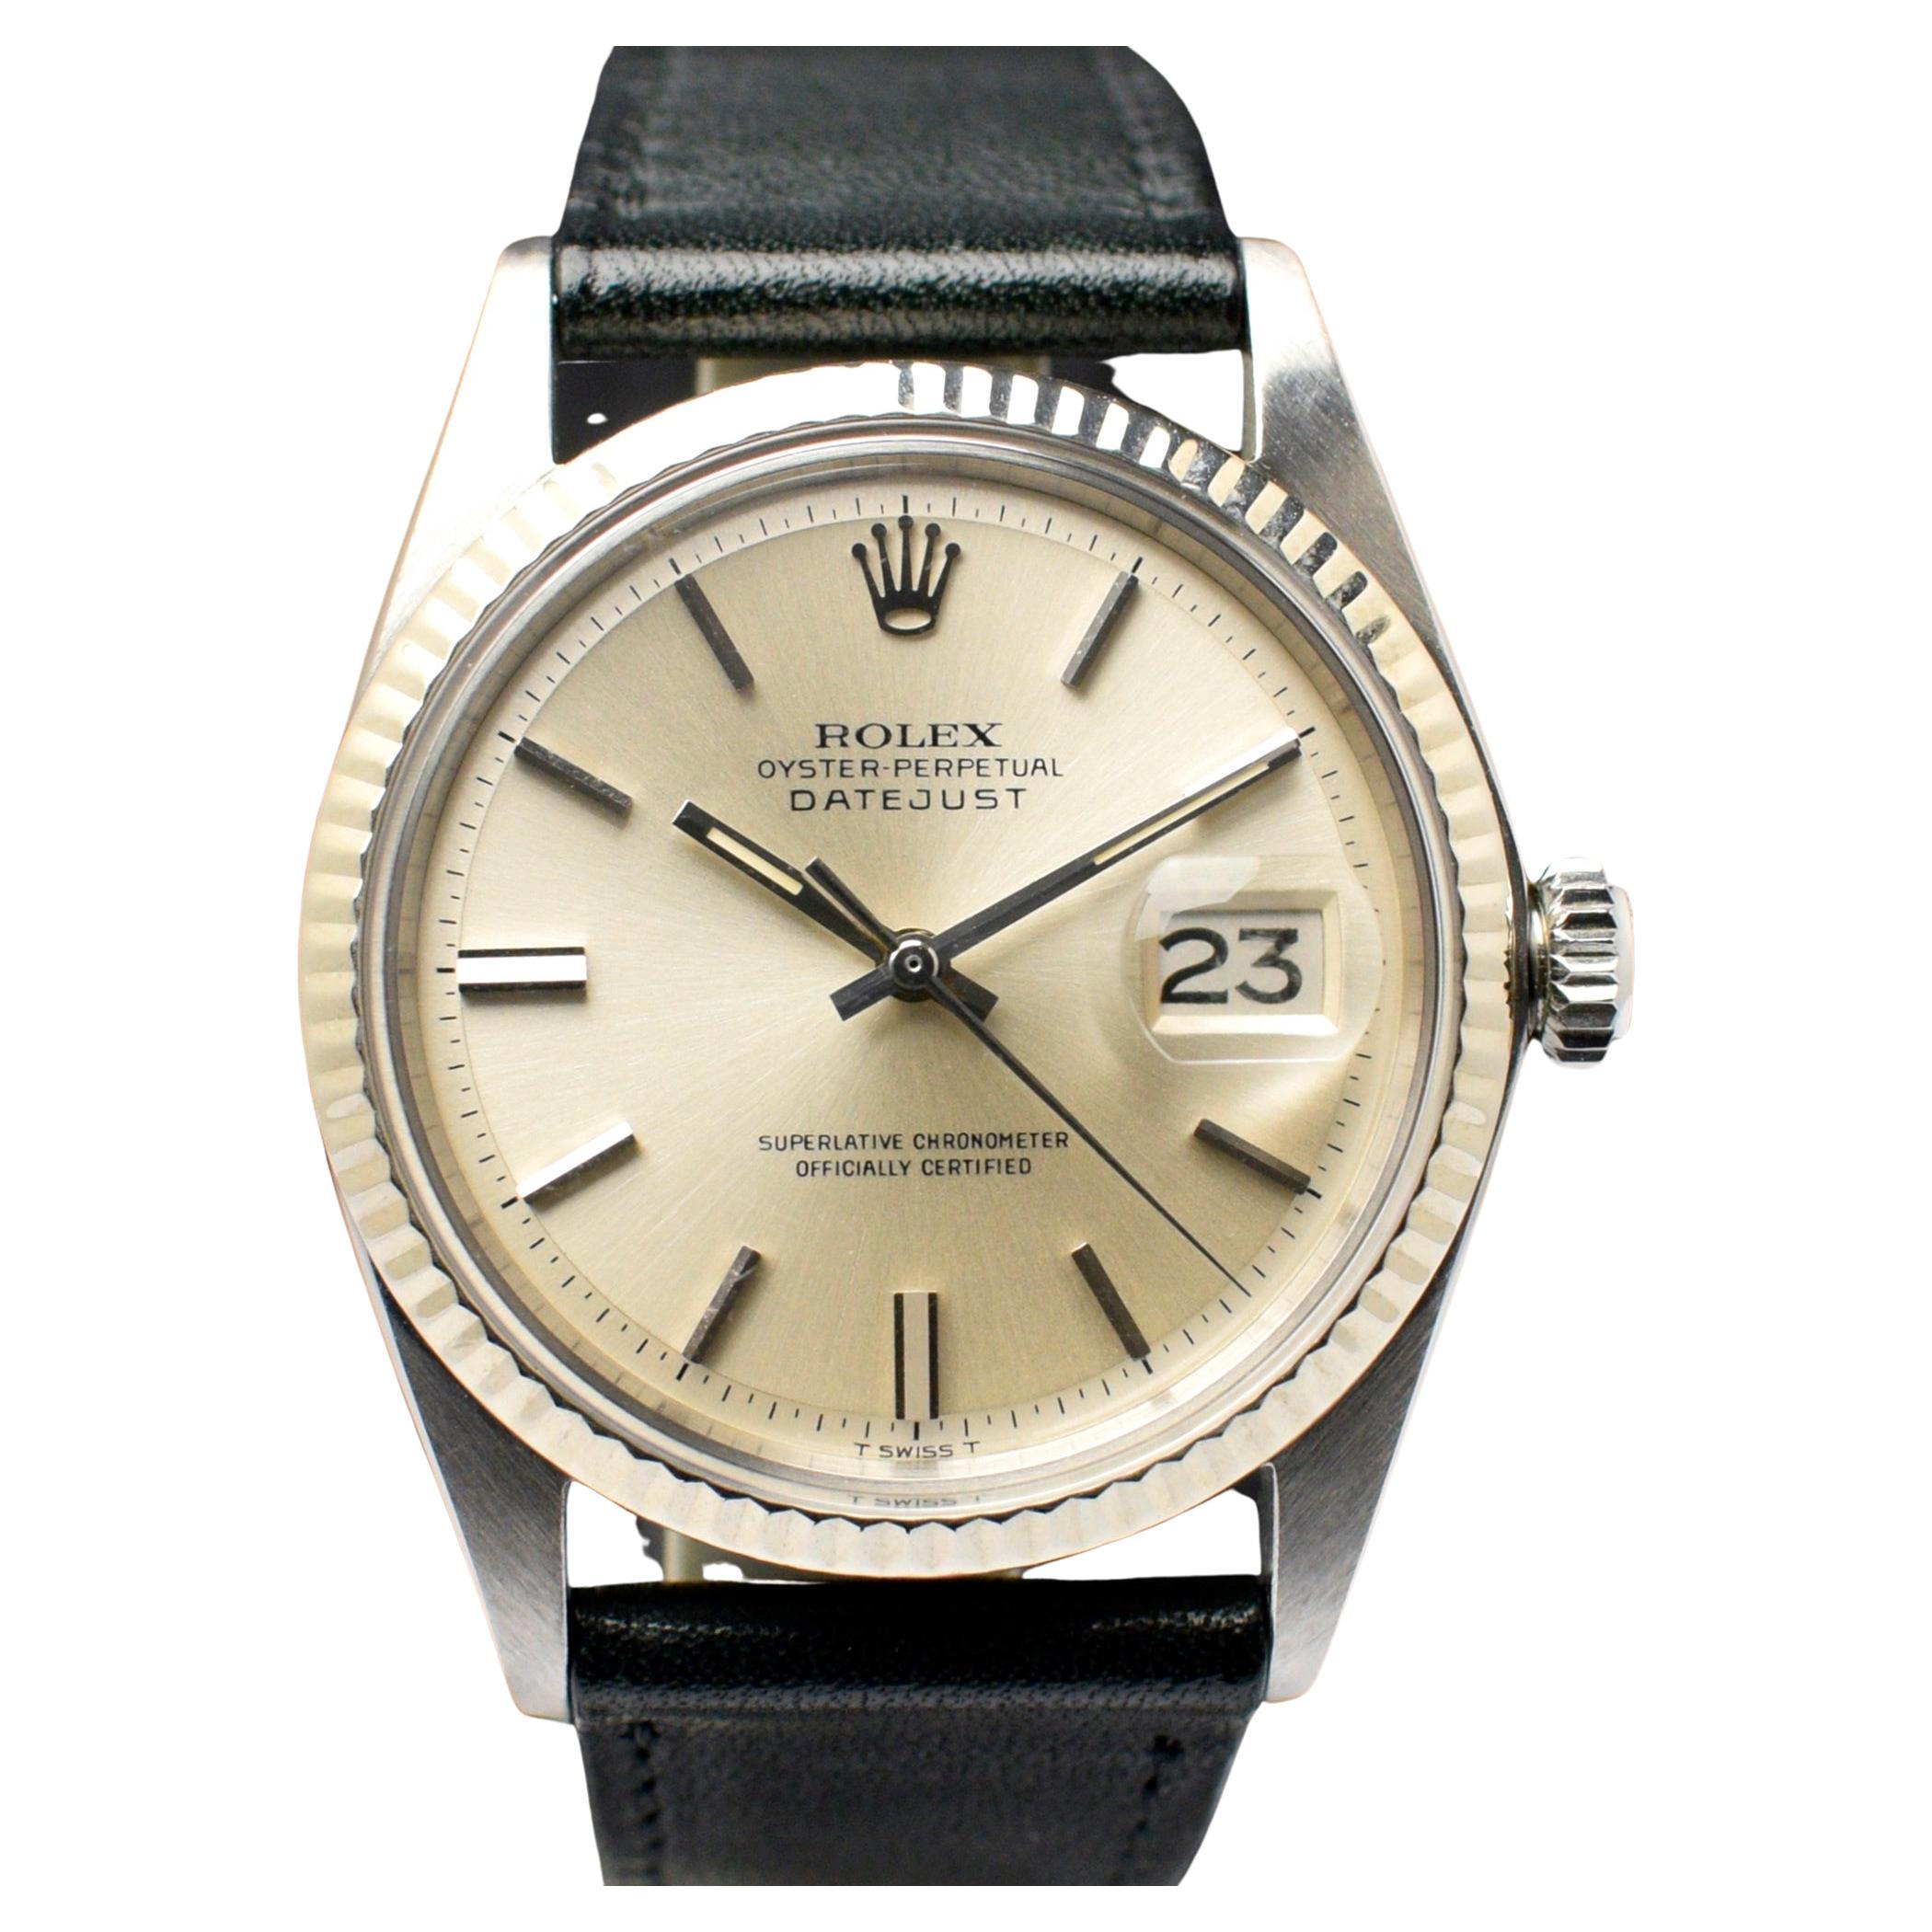 Rolex Oyster Perpetual Datejust Steel 1601 Silver Dial Automatic Watch, 1970